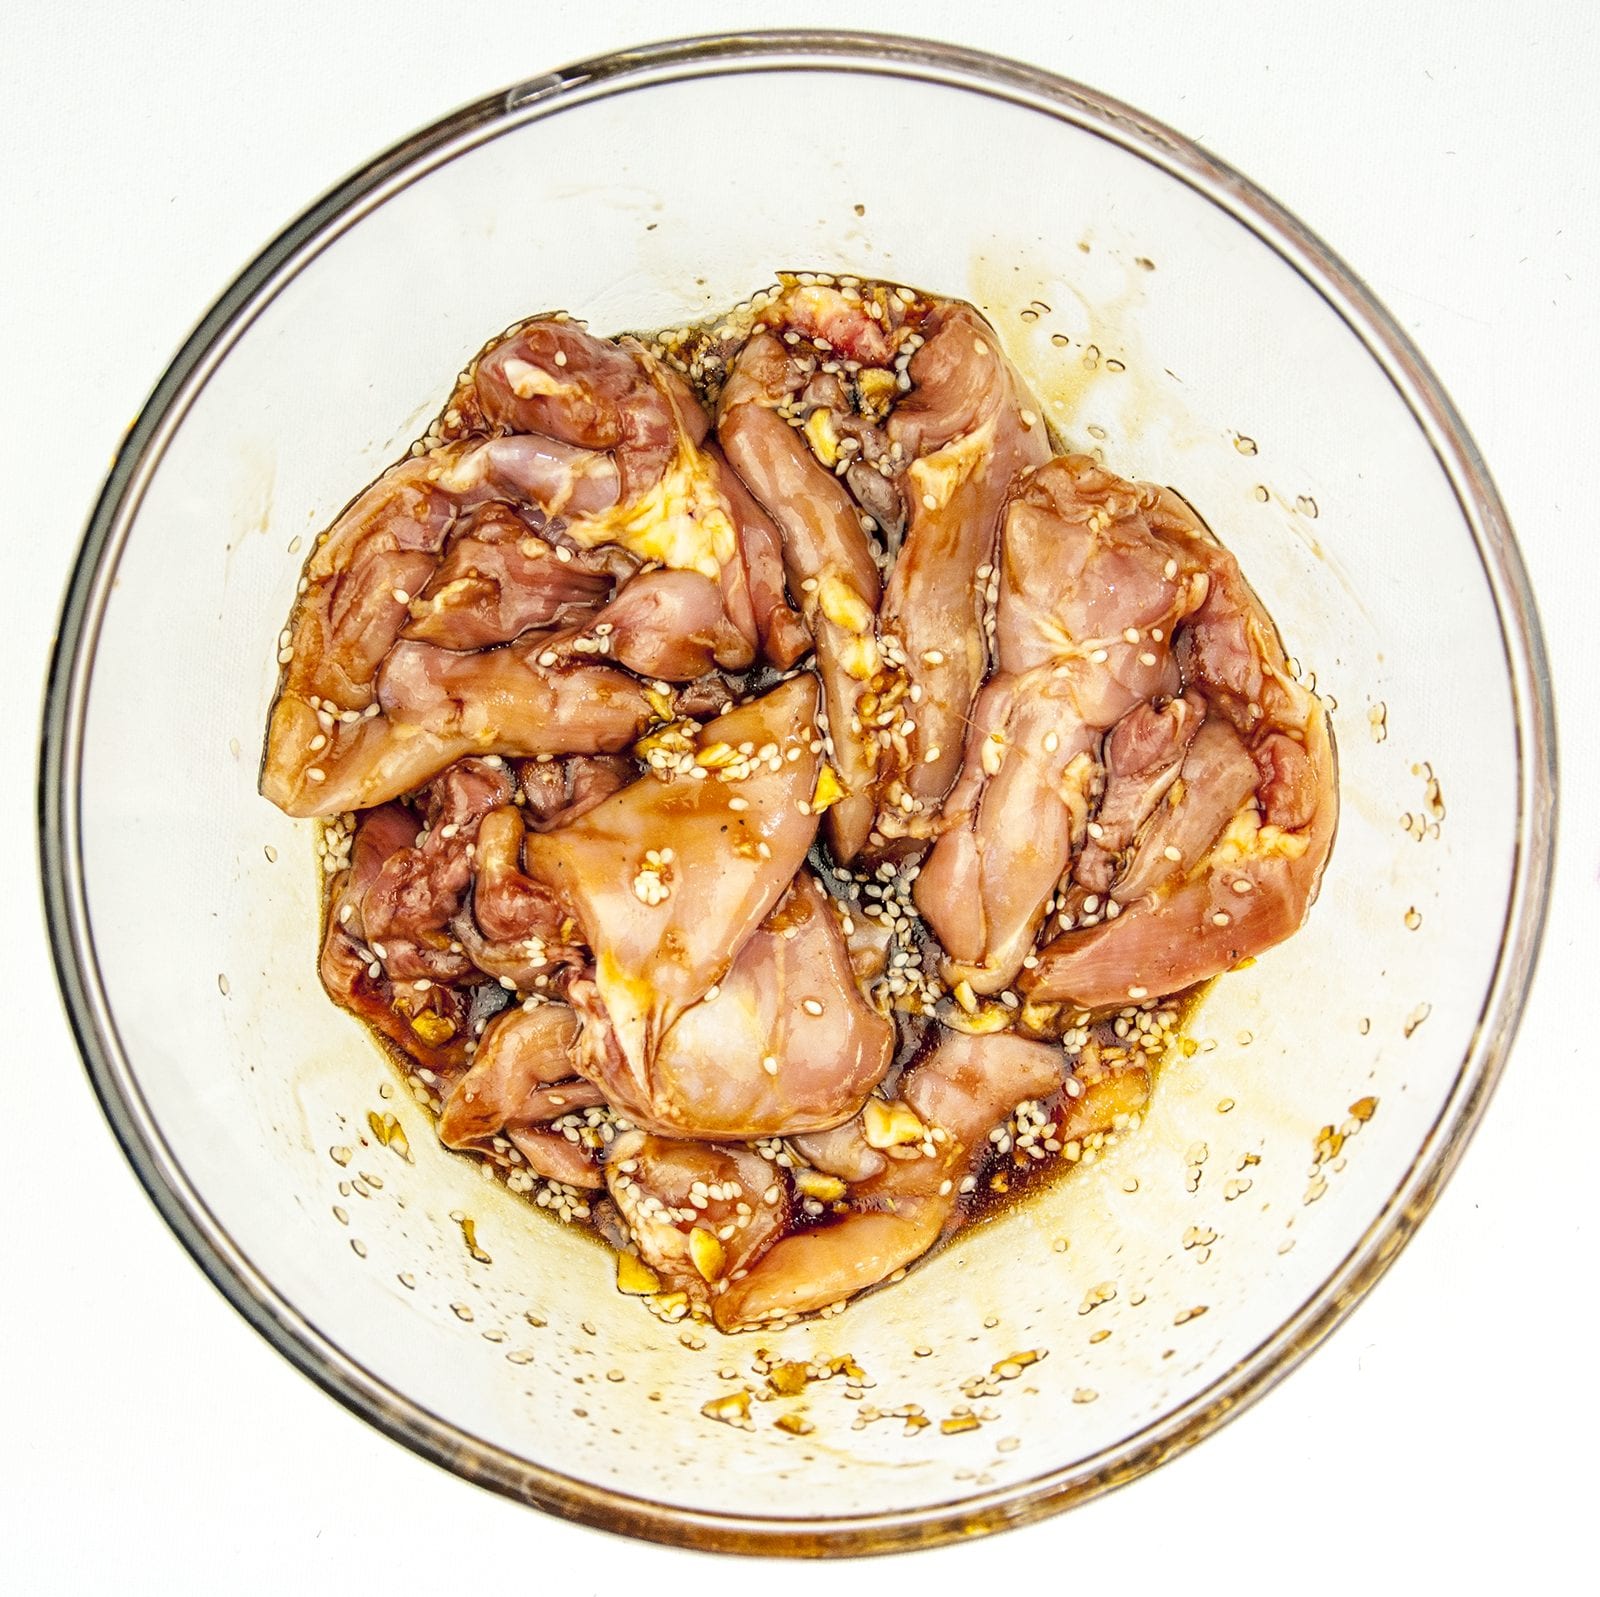 This Chinese chicken thigh recipe is so simple and wonderfully tasty. A marinade of honey, soy sauce, ginger, garlic and sesame. Sounds fantastic right? Yum! | theyumyumclub.com